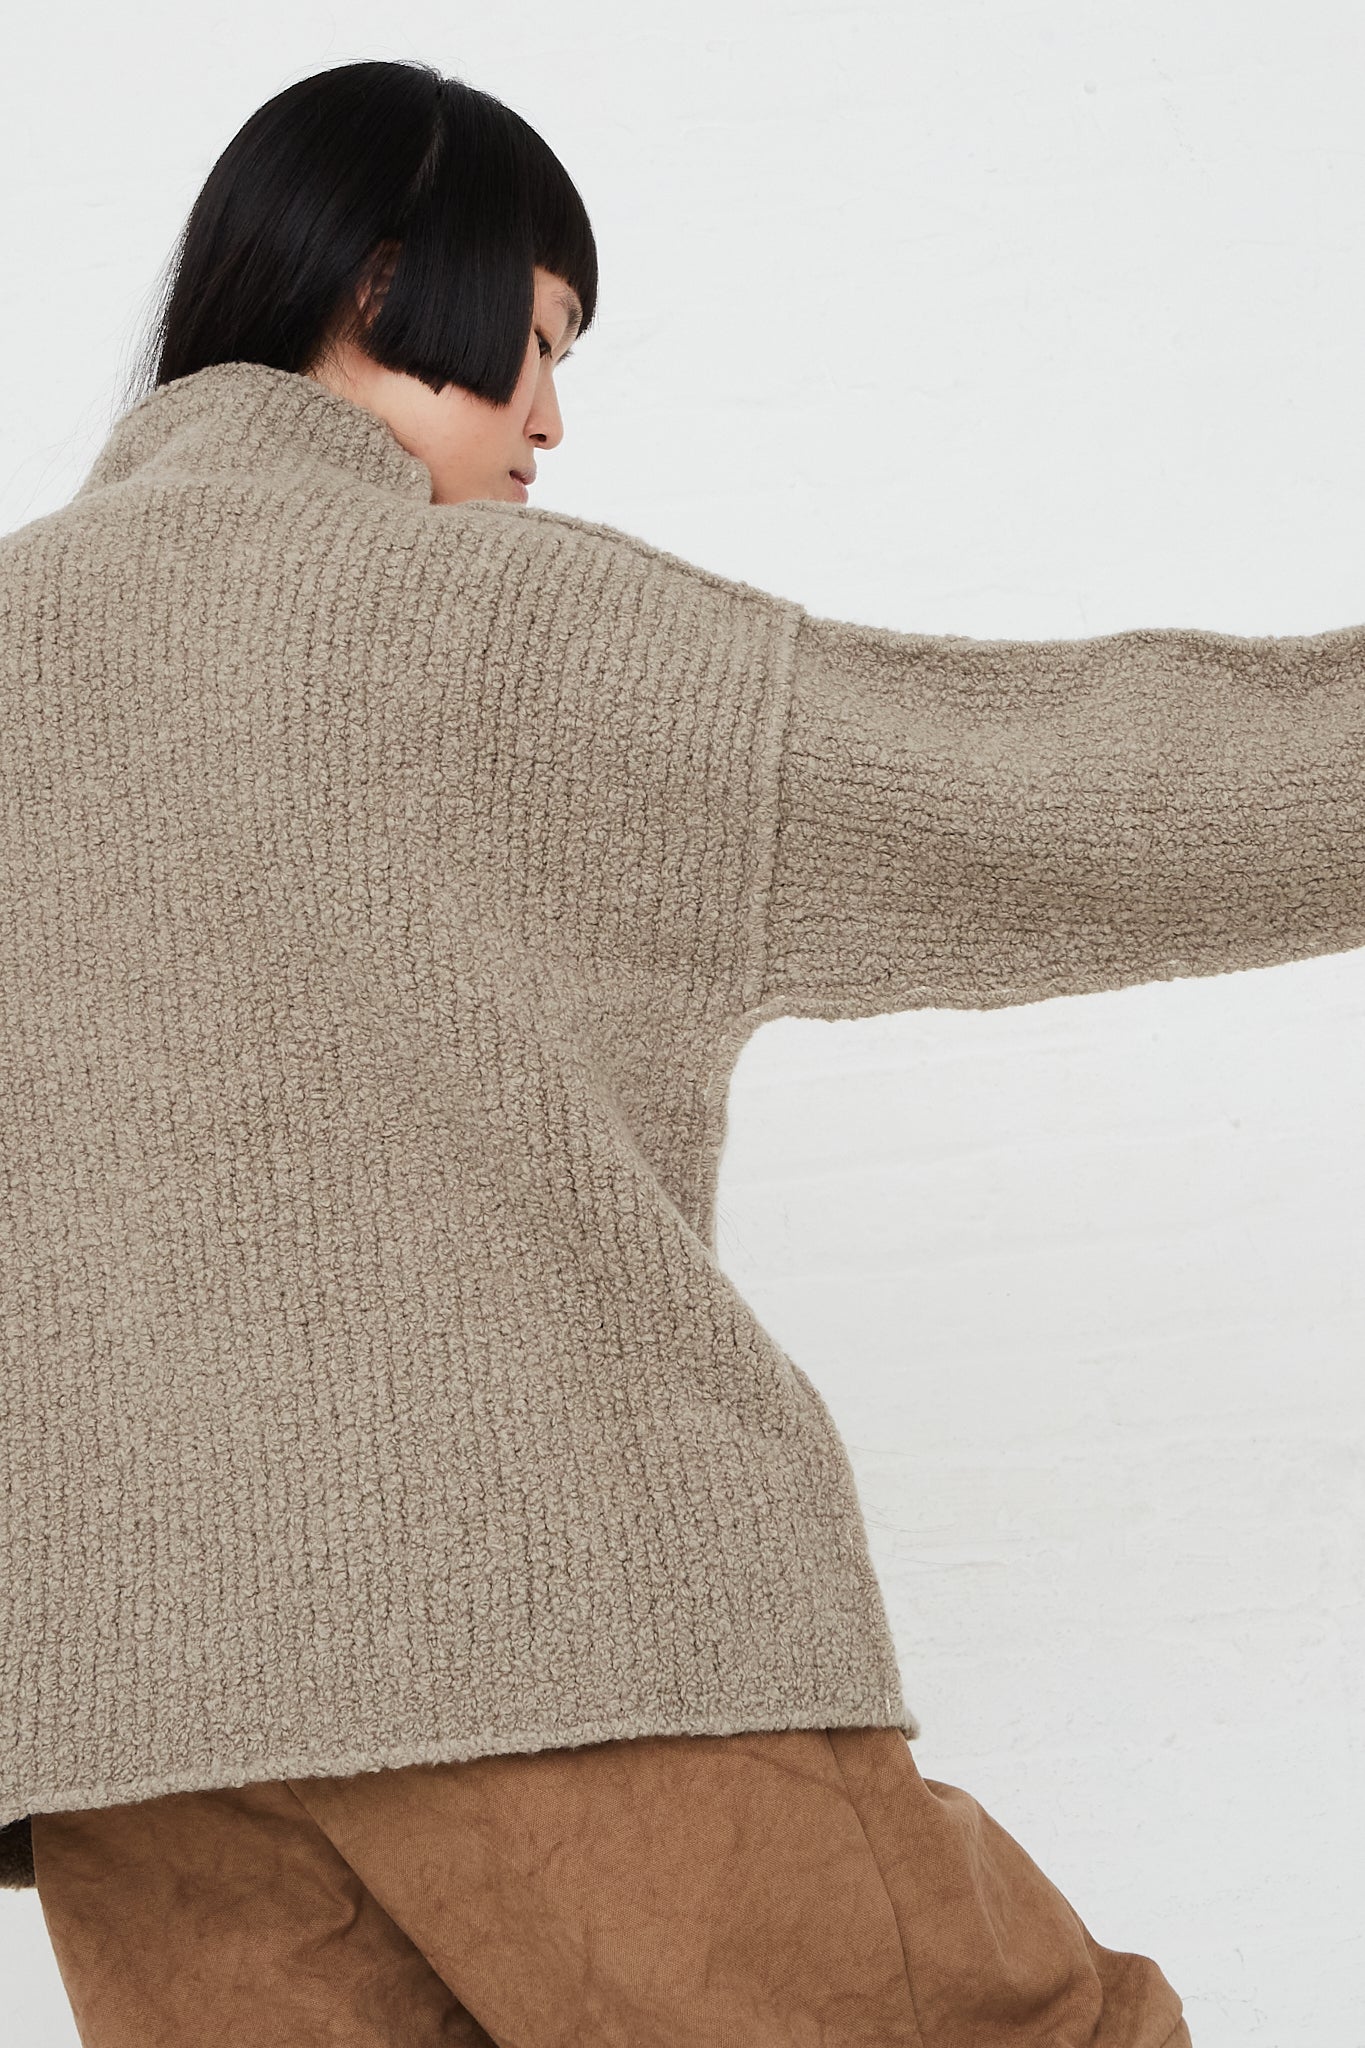 Taupe Turtleneck Sweater in Merino Boucle Wool by Lauren Manoogian for Oroboro Back